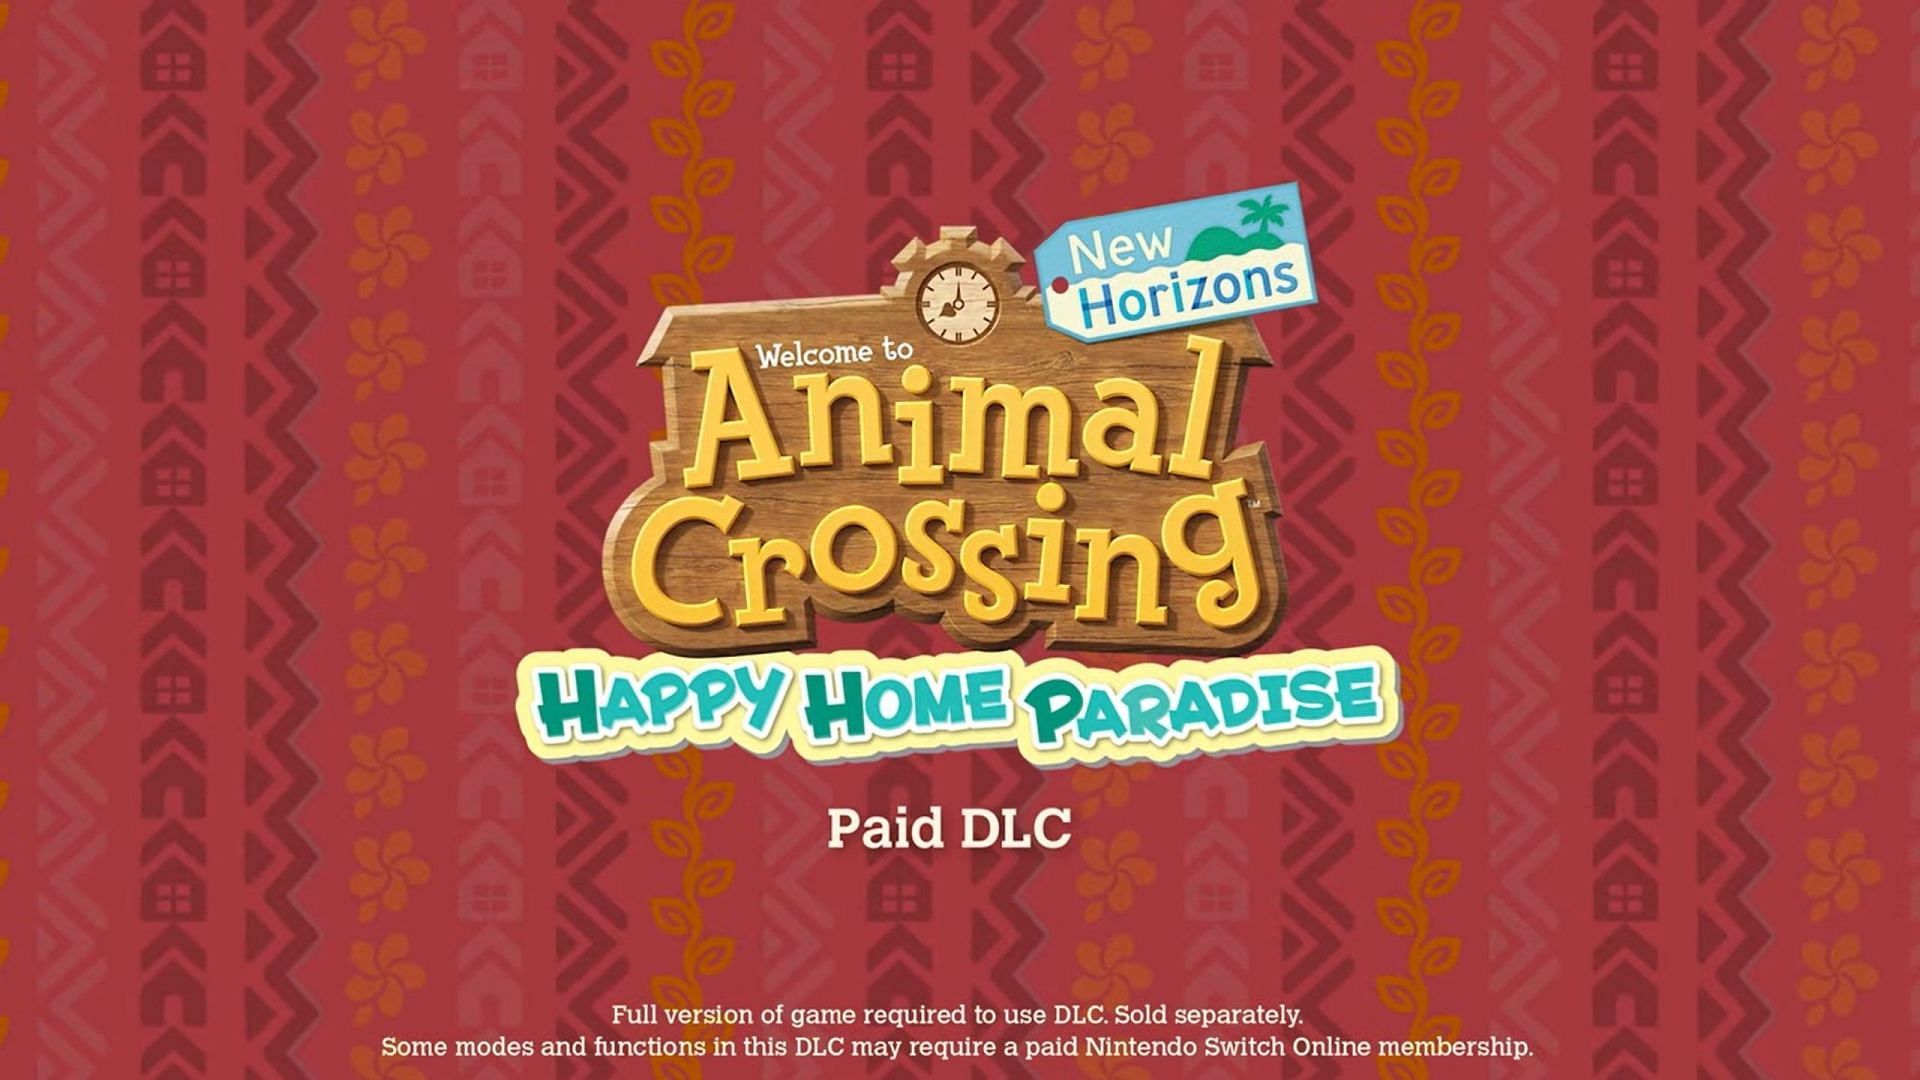 The first paid DLC will also be arriving November 5. (Image via Nintendo)